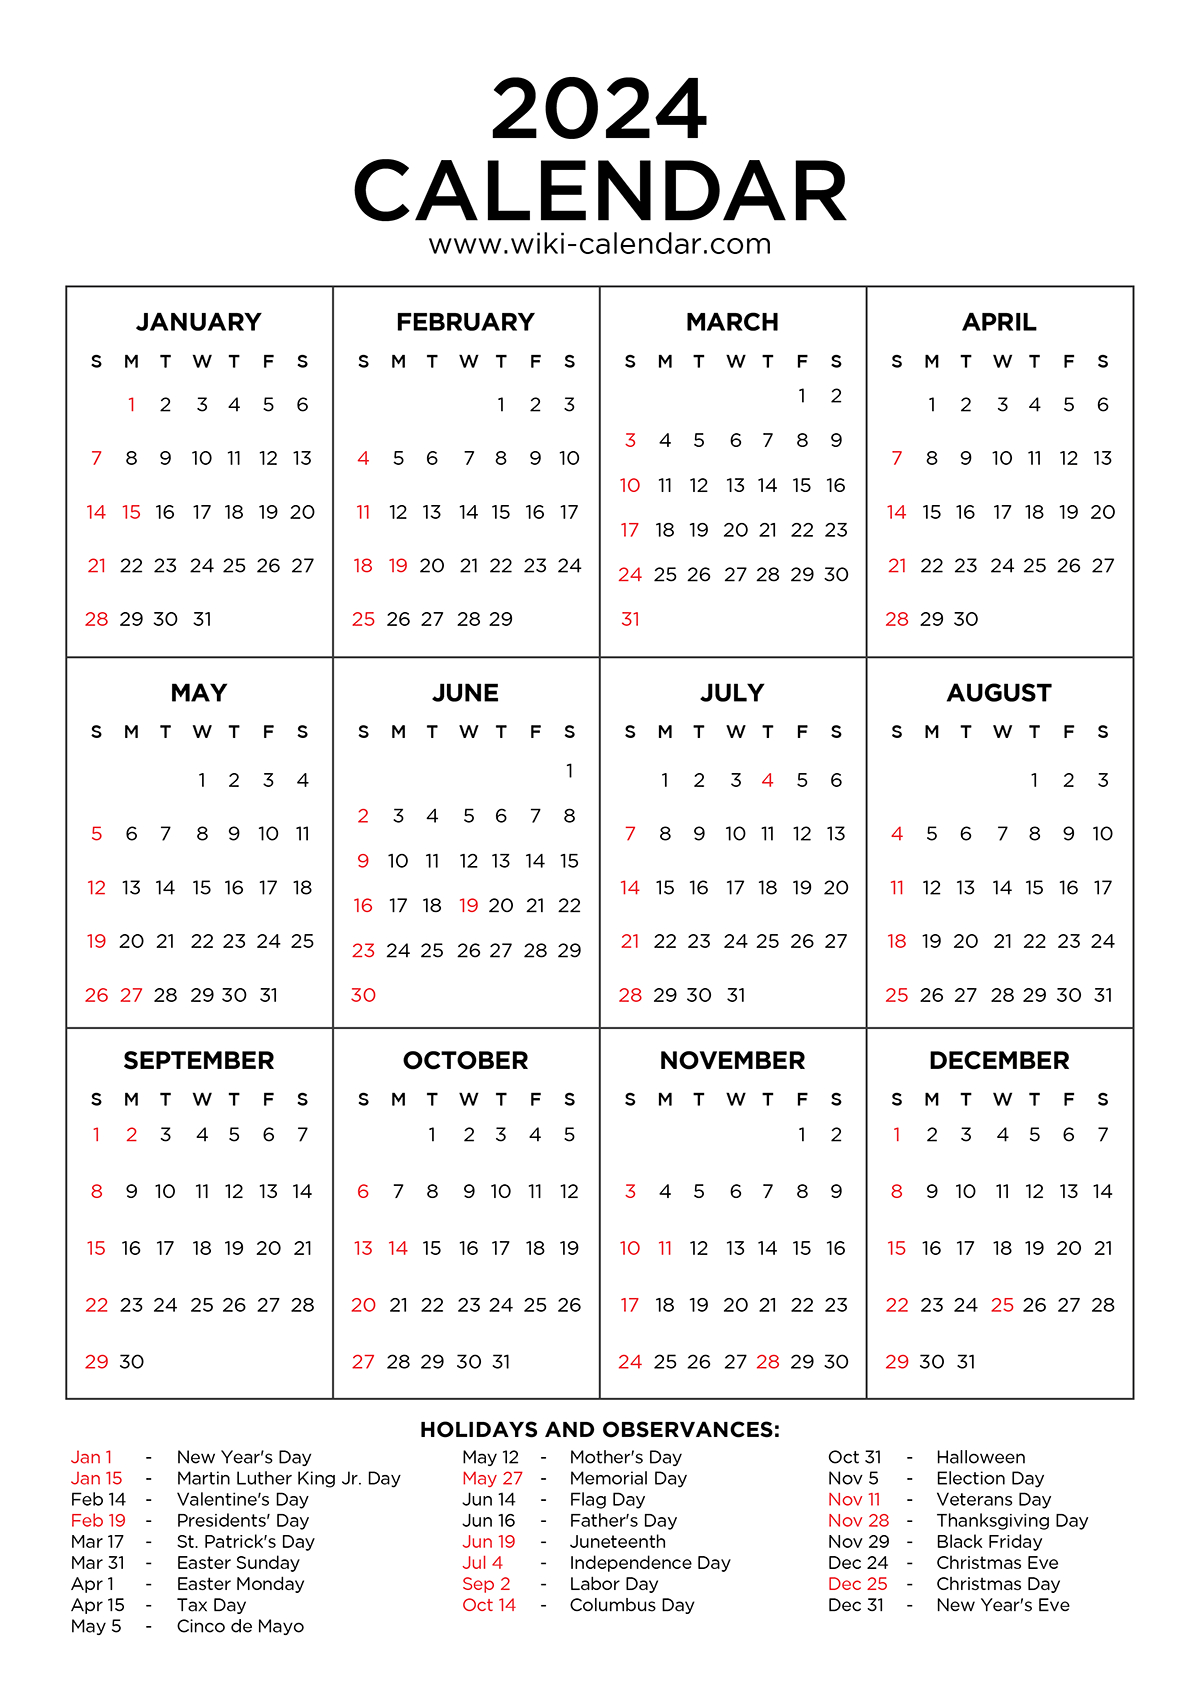 Year 2024 Calendar Printable With Holidays - Wiki Calendar throughout Free Printable Calendar 2024 With Holidays Free Download